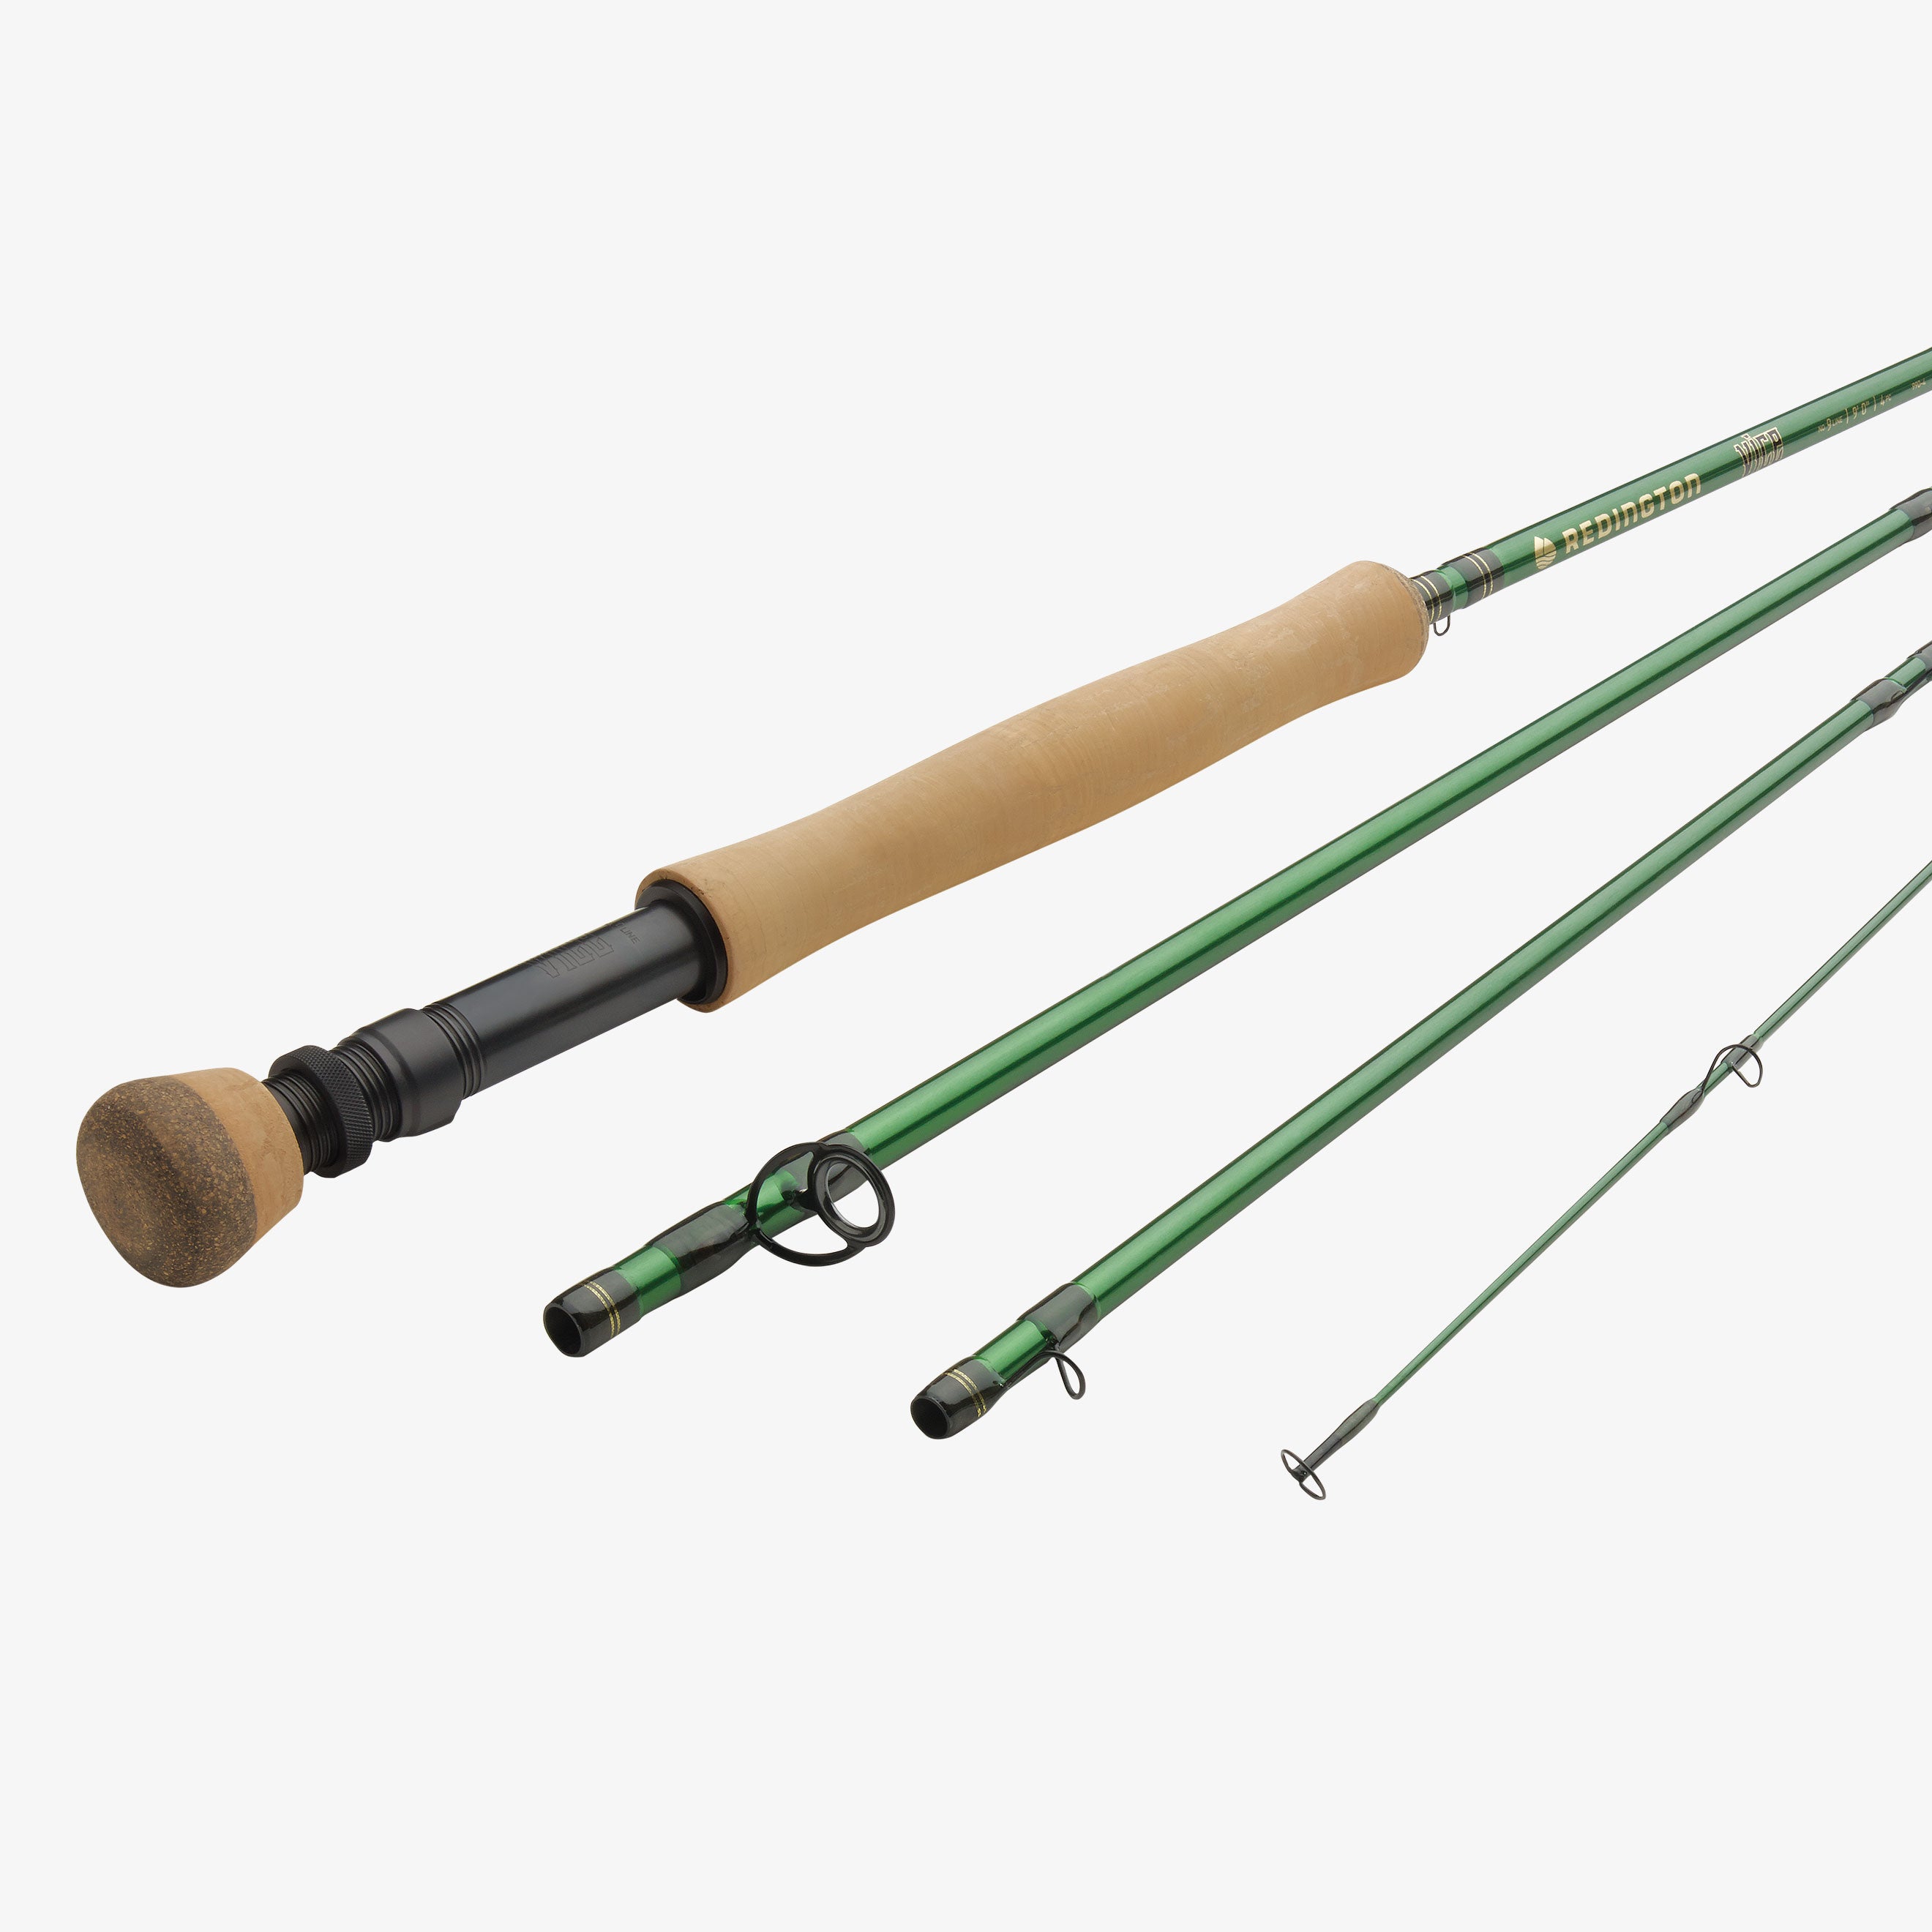 Wychwood RS Fly Fishing Rod 9ft 10ft 4 Piece All Sizes With Carbon